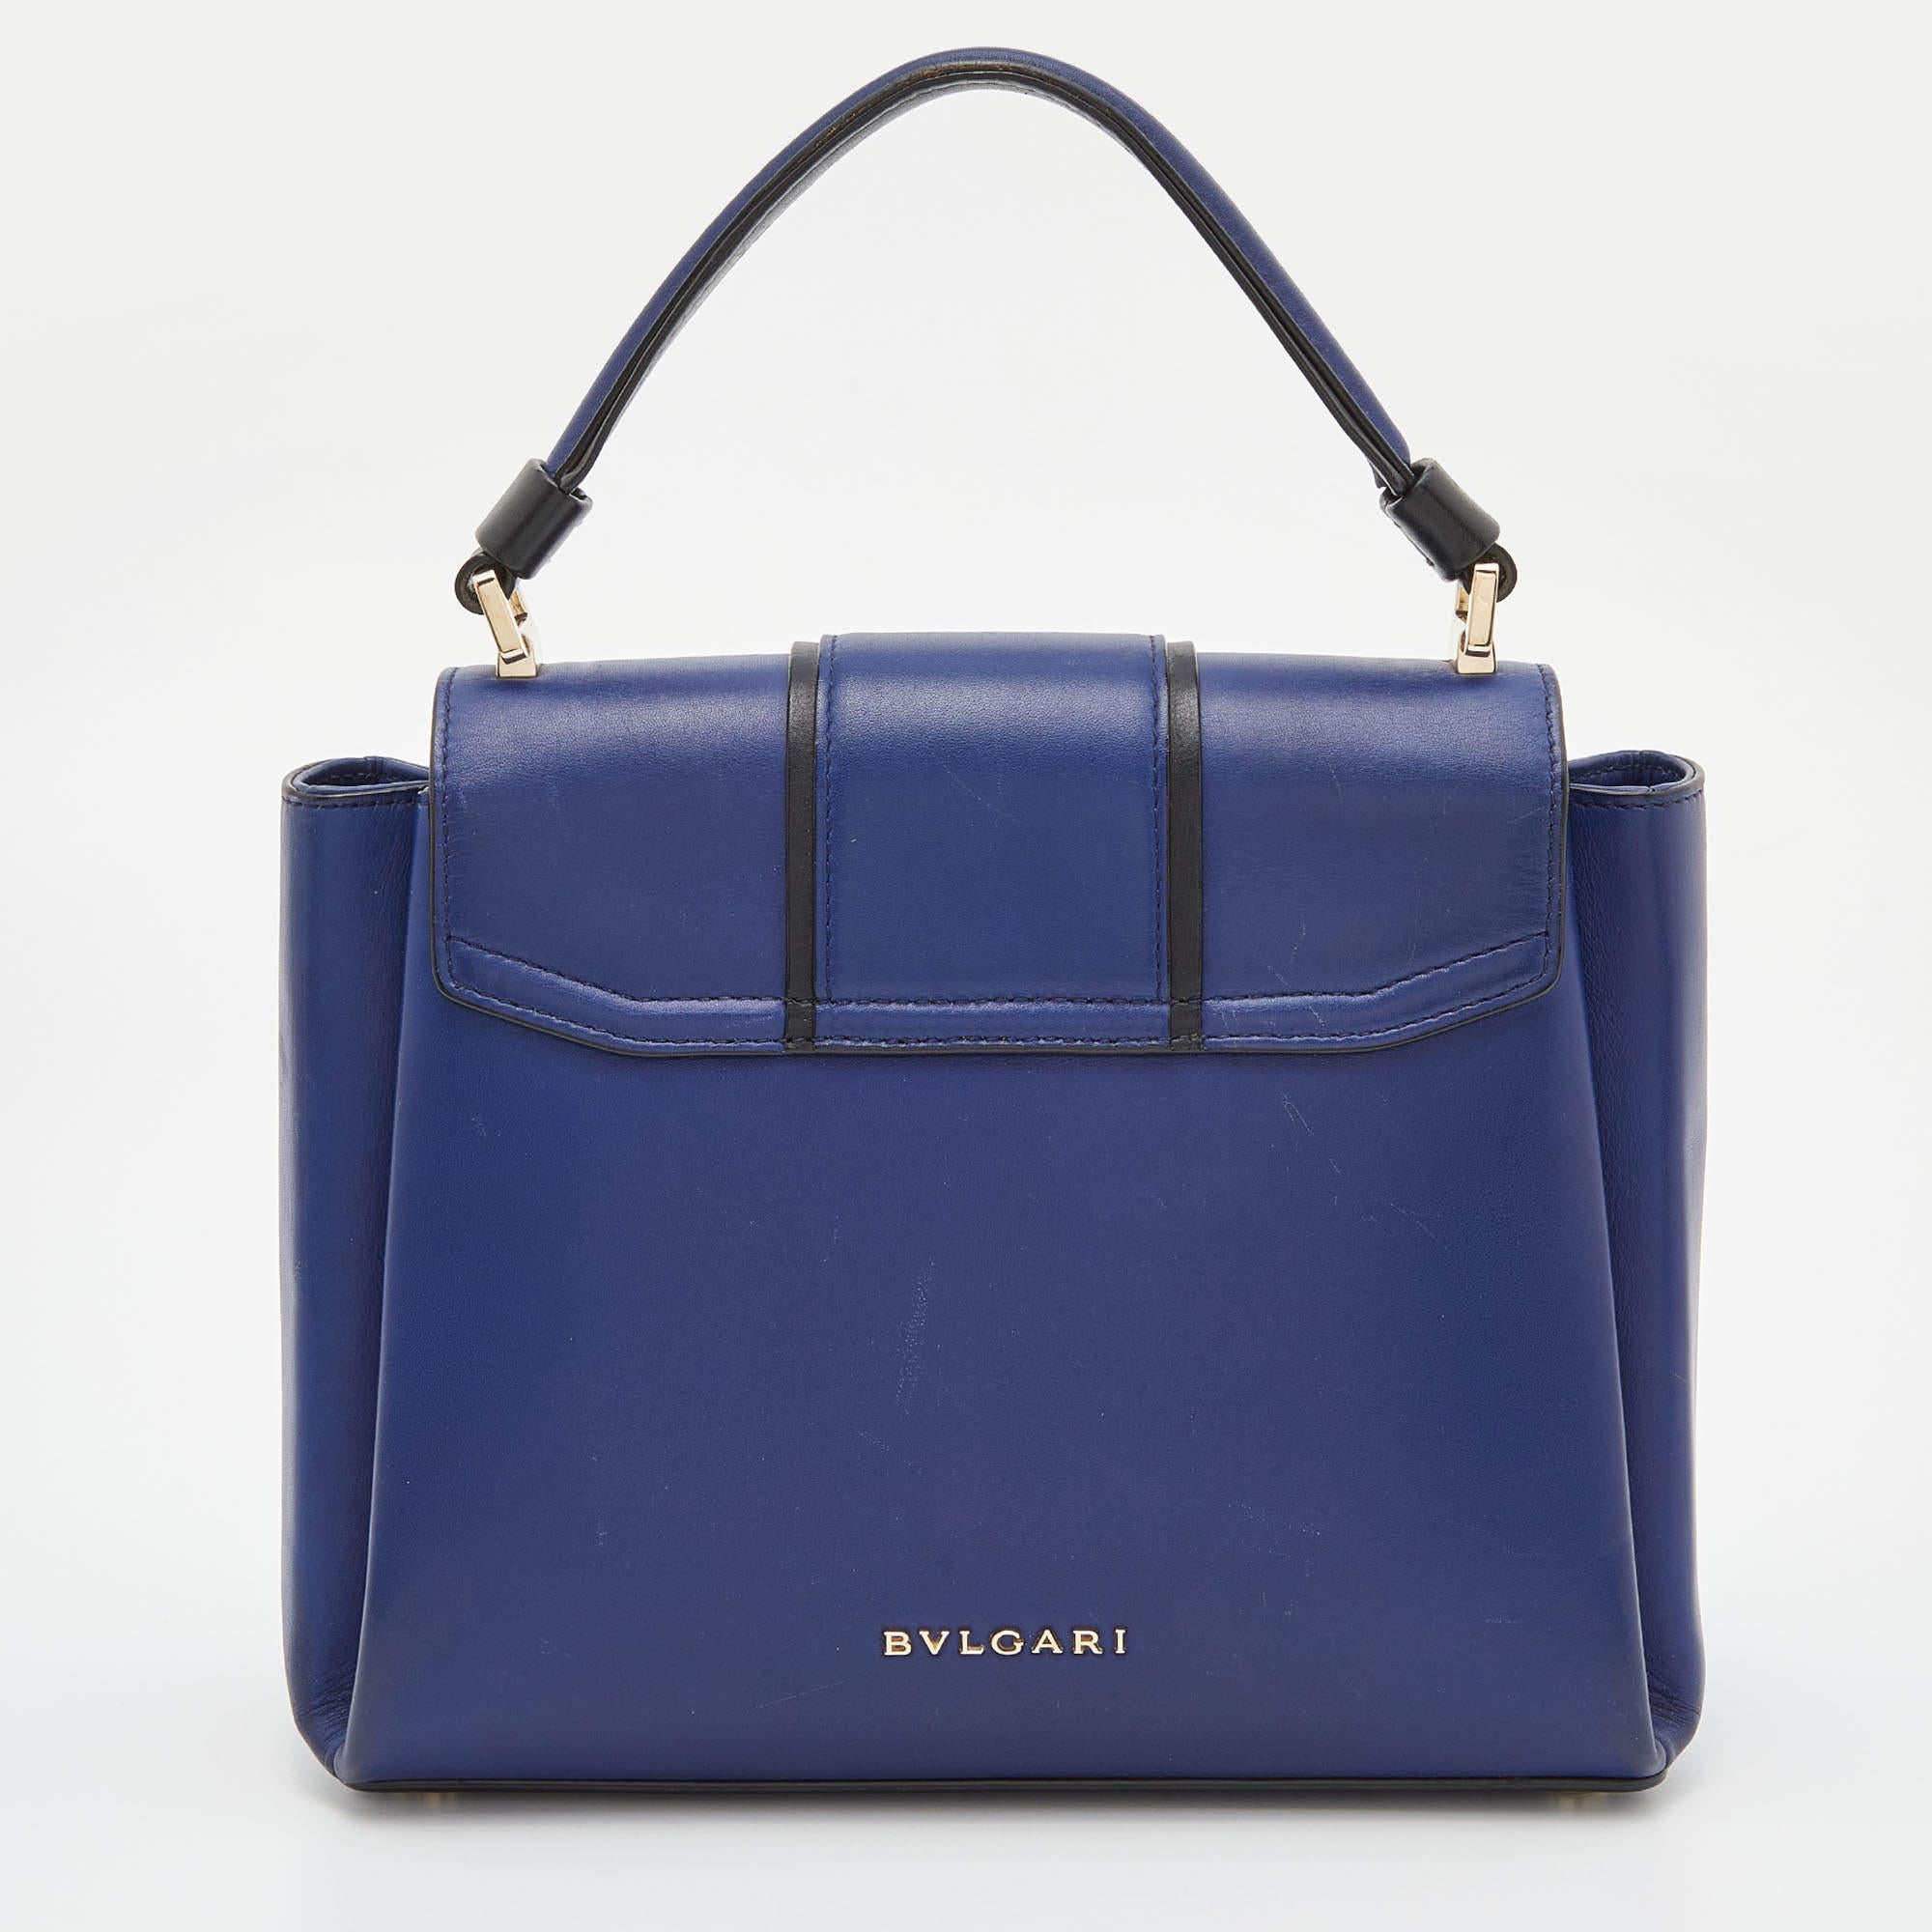 This beauty is from Bvlgari, and it is a sight to behold! It is excellently crafted from leather and designed to make every handbag lover swoon. The bag holds a stunning enamel lock on the flap which has the brand's iconic design. A well-sized